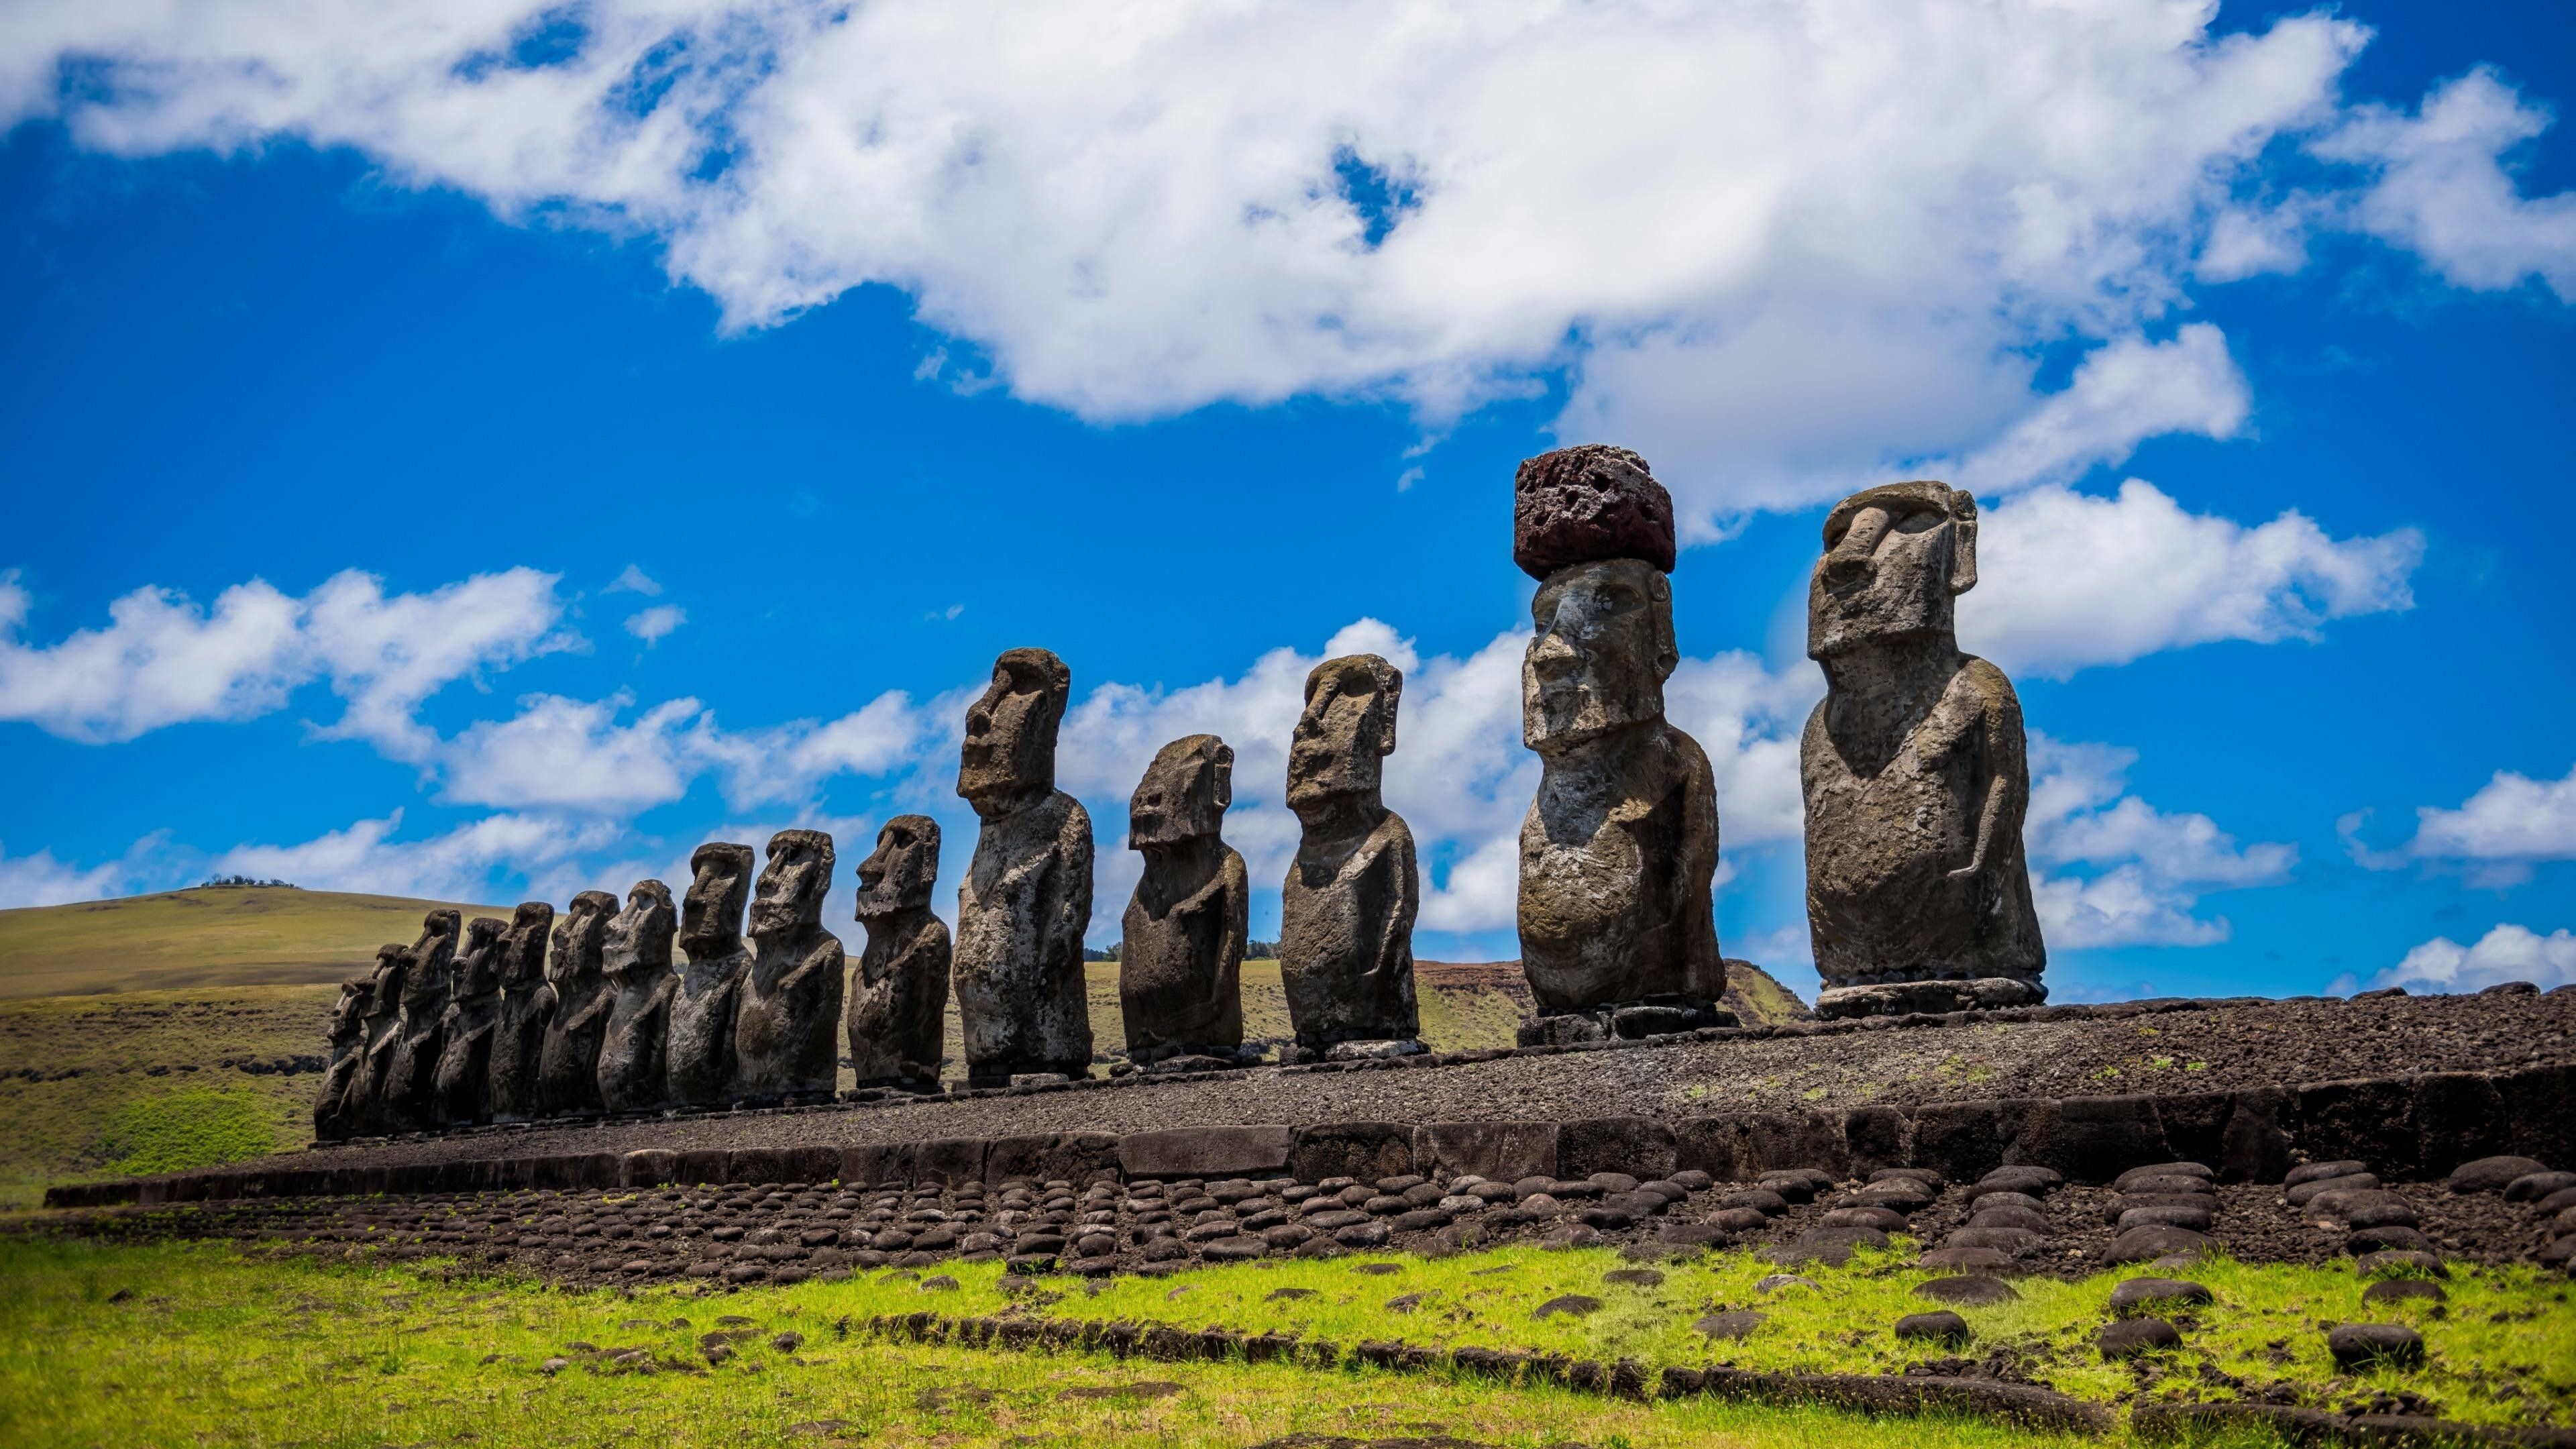 Moai: Monolithic human figures carved by the Rapa Nui people. 3840x2160 4K Wallpaper.